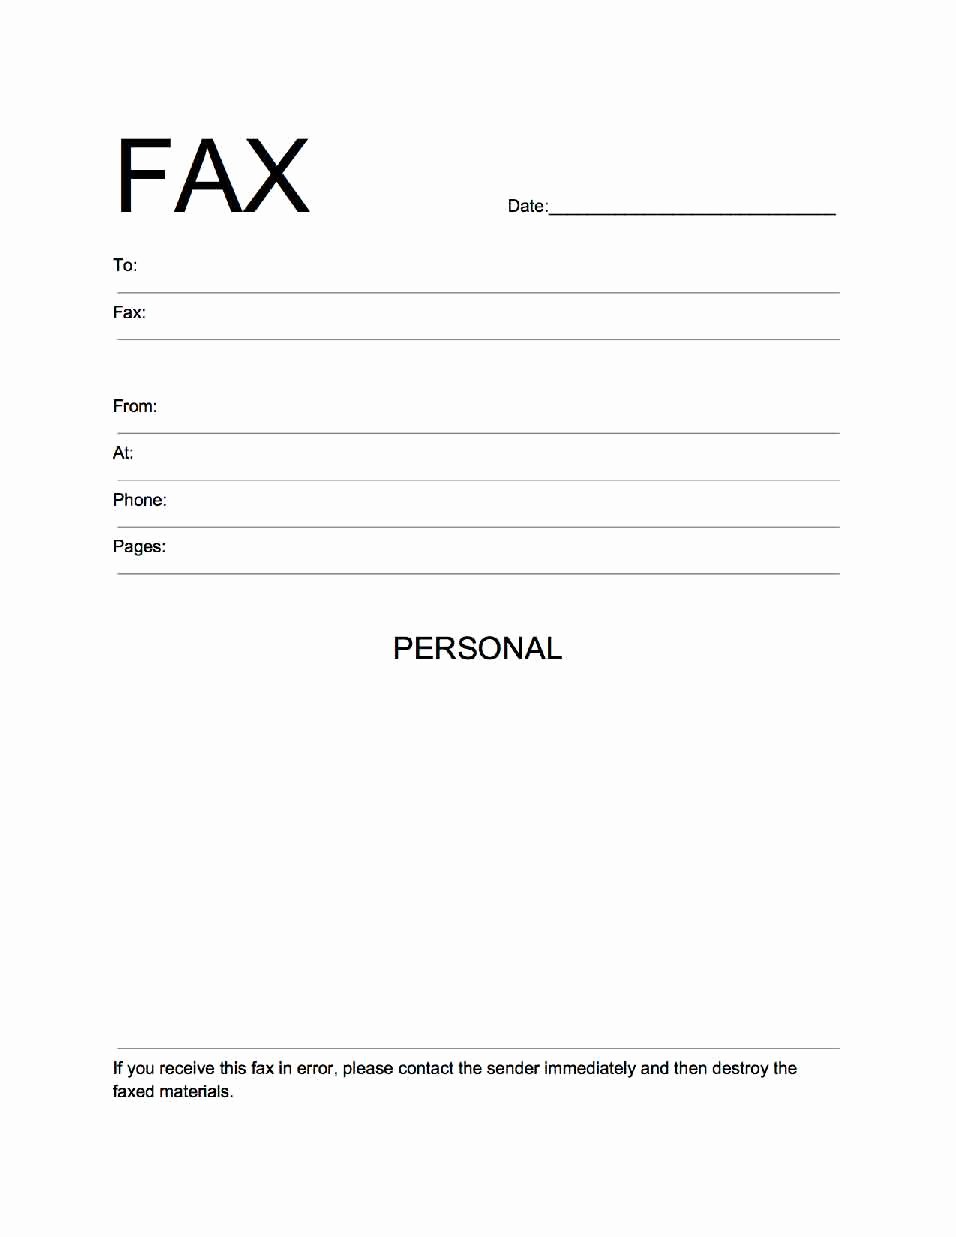 Fax Cover Page Sample Beautiful Free Fax Cover Sheet Template Download